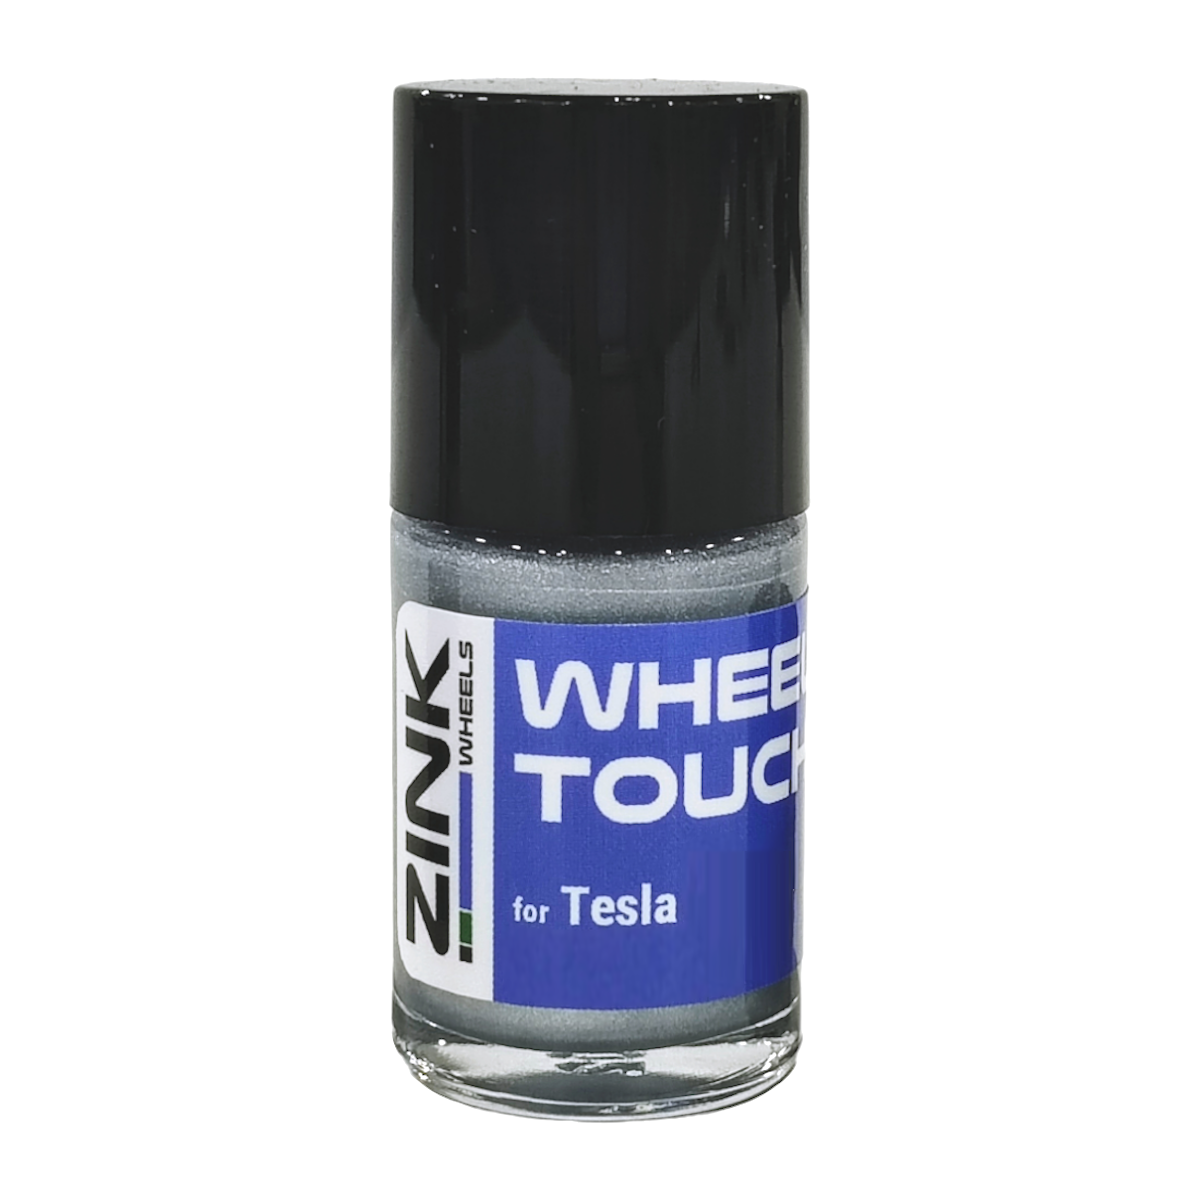 Tesla Wheel Touch-Up Paint for Model X 20-inch Silver Slipstream Rims - Color-matched Paint for DIY Curb Rash Repair